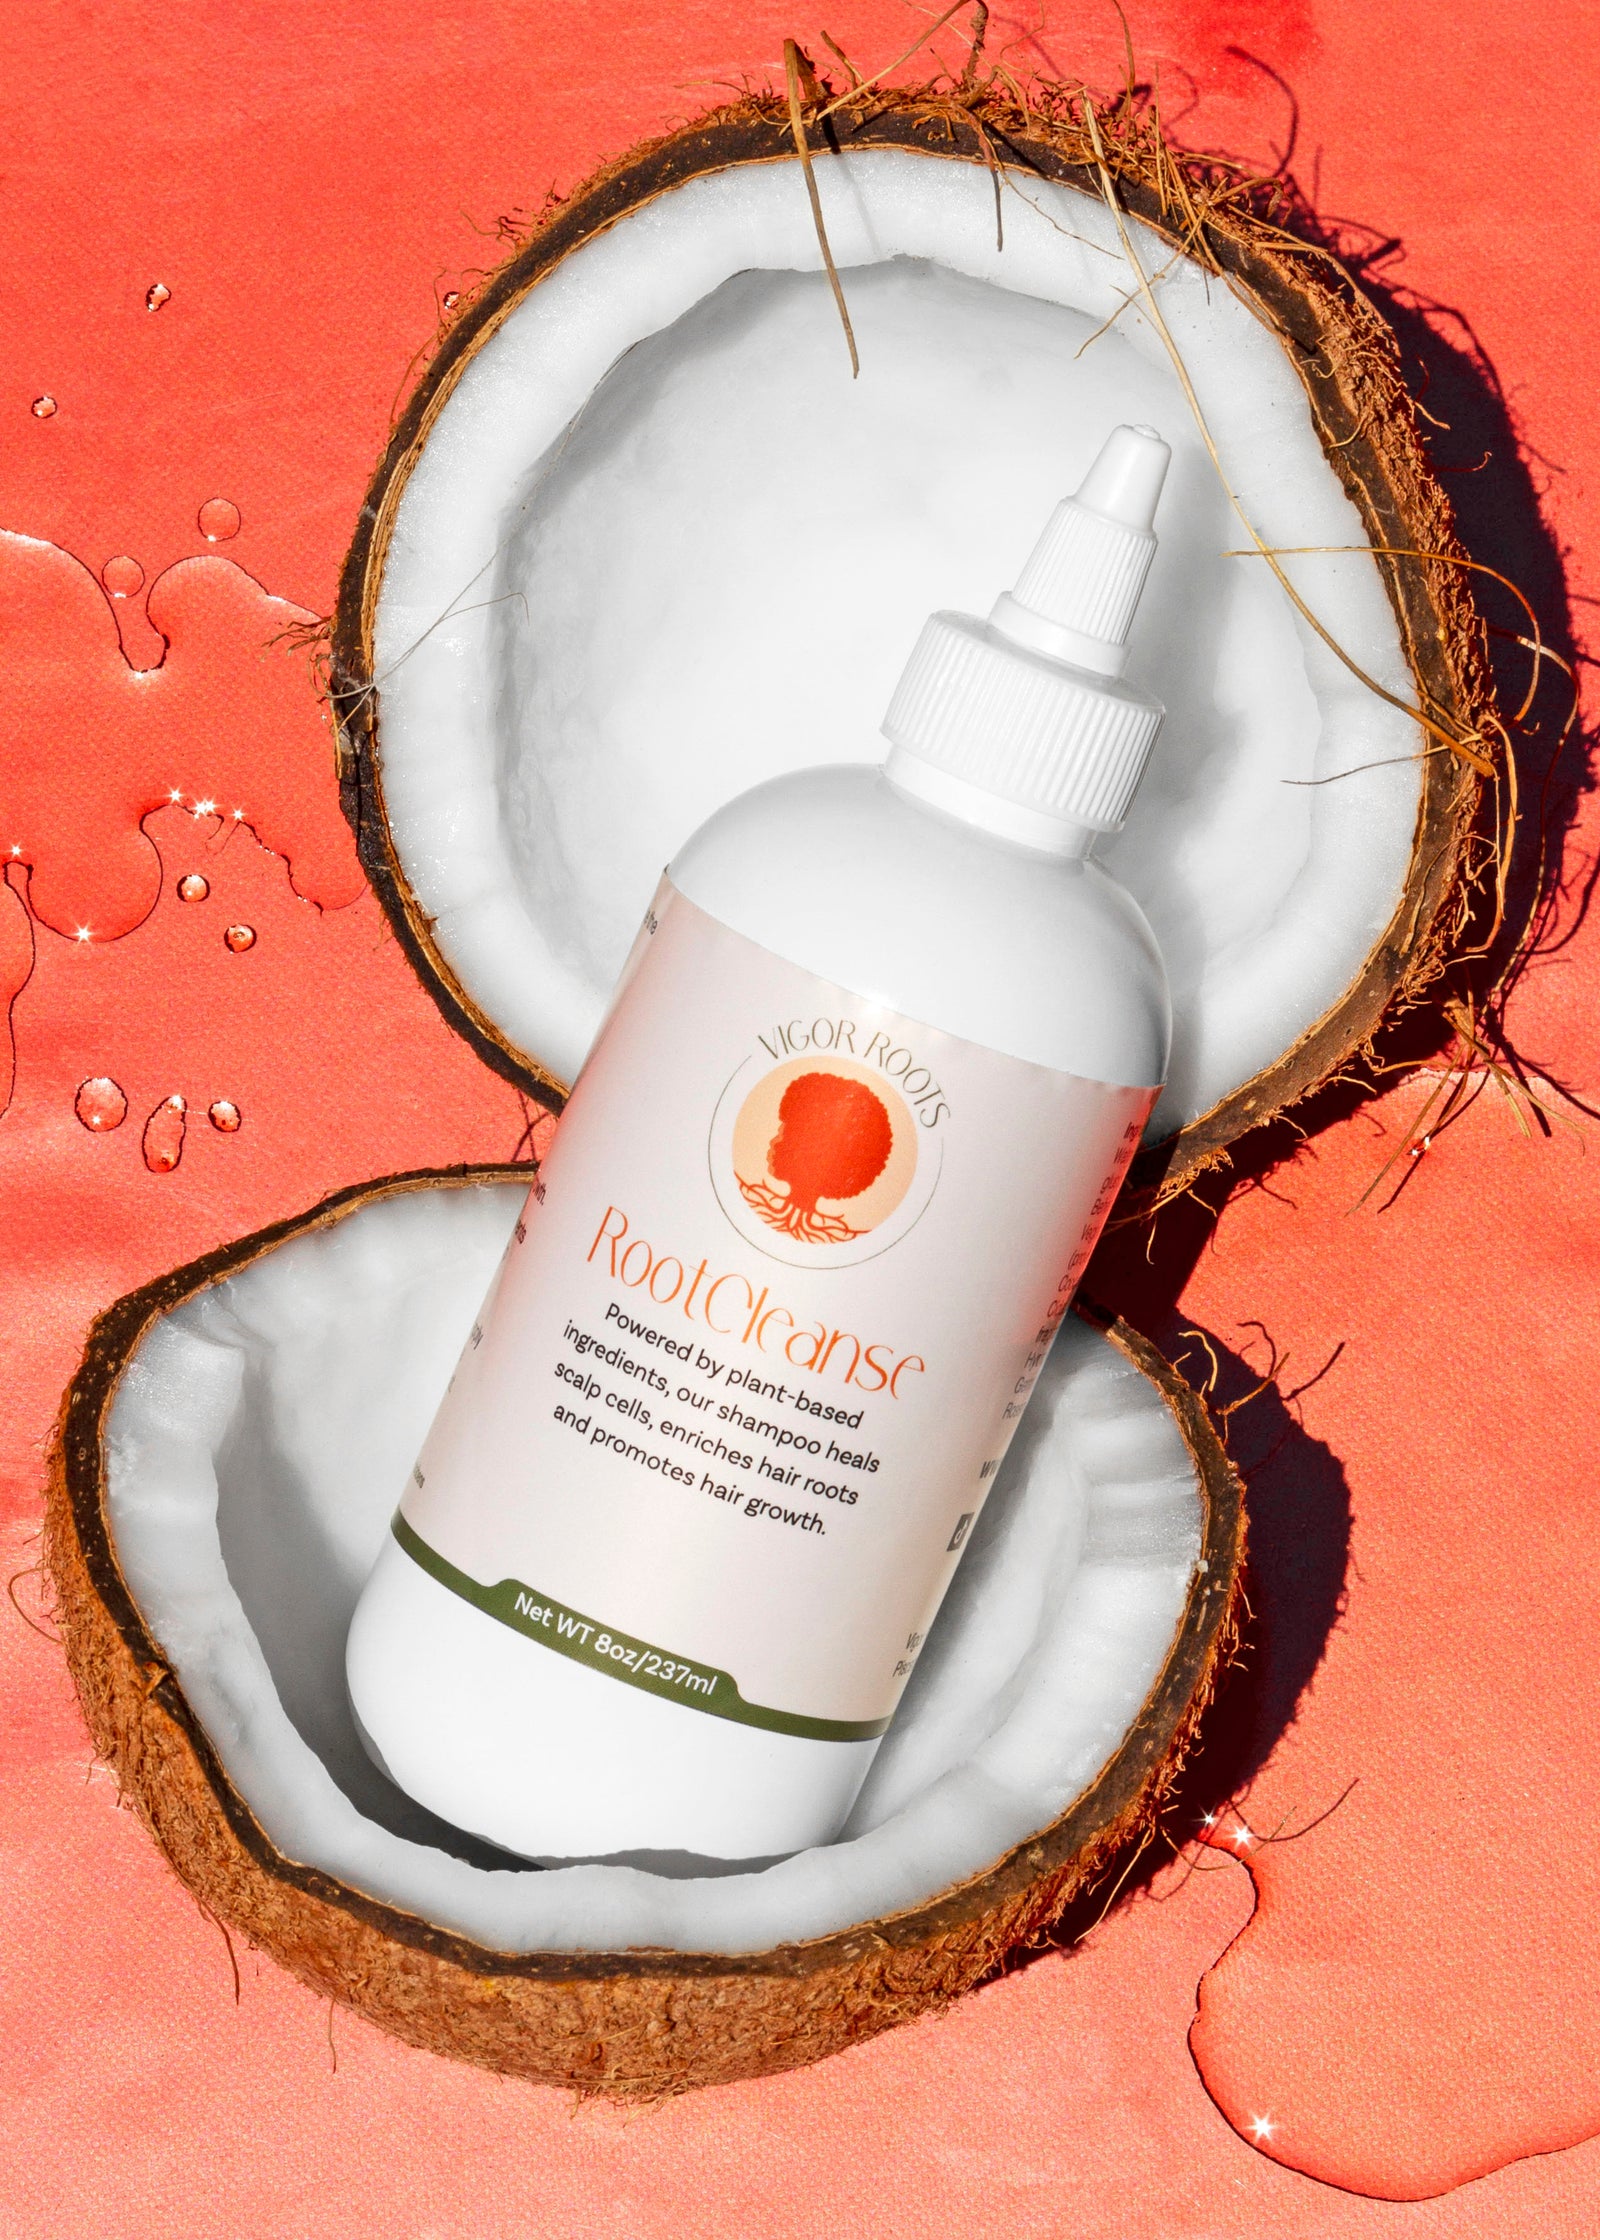 A ProductPhoto of RootCleanse: the best moisturizing shampoo for natural hair care. The bottle is posed inside of a coconut, one of the food-grade, natural ingredients included in the formula.